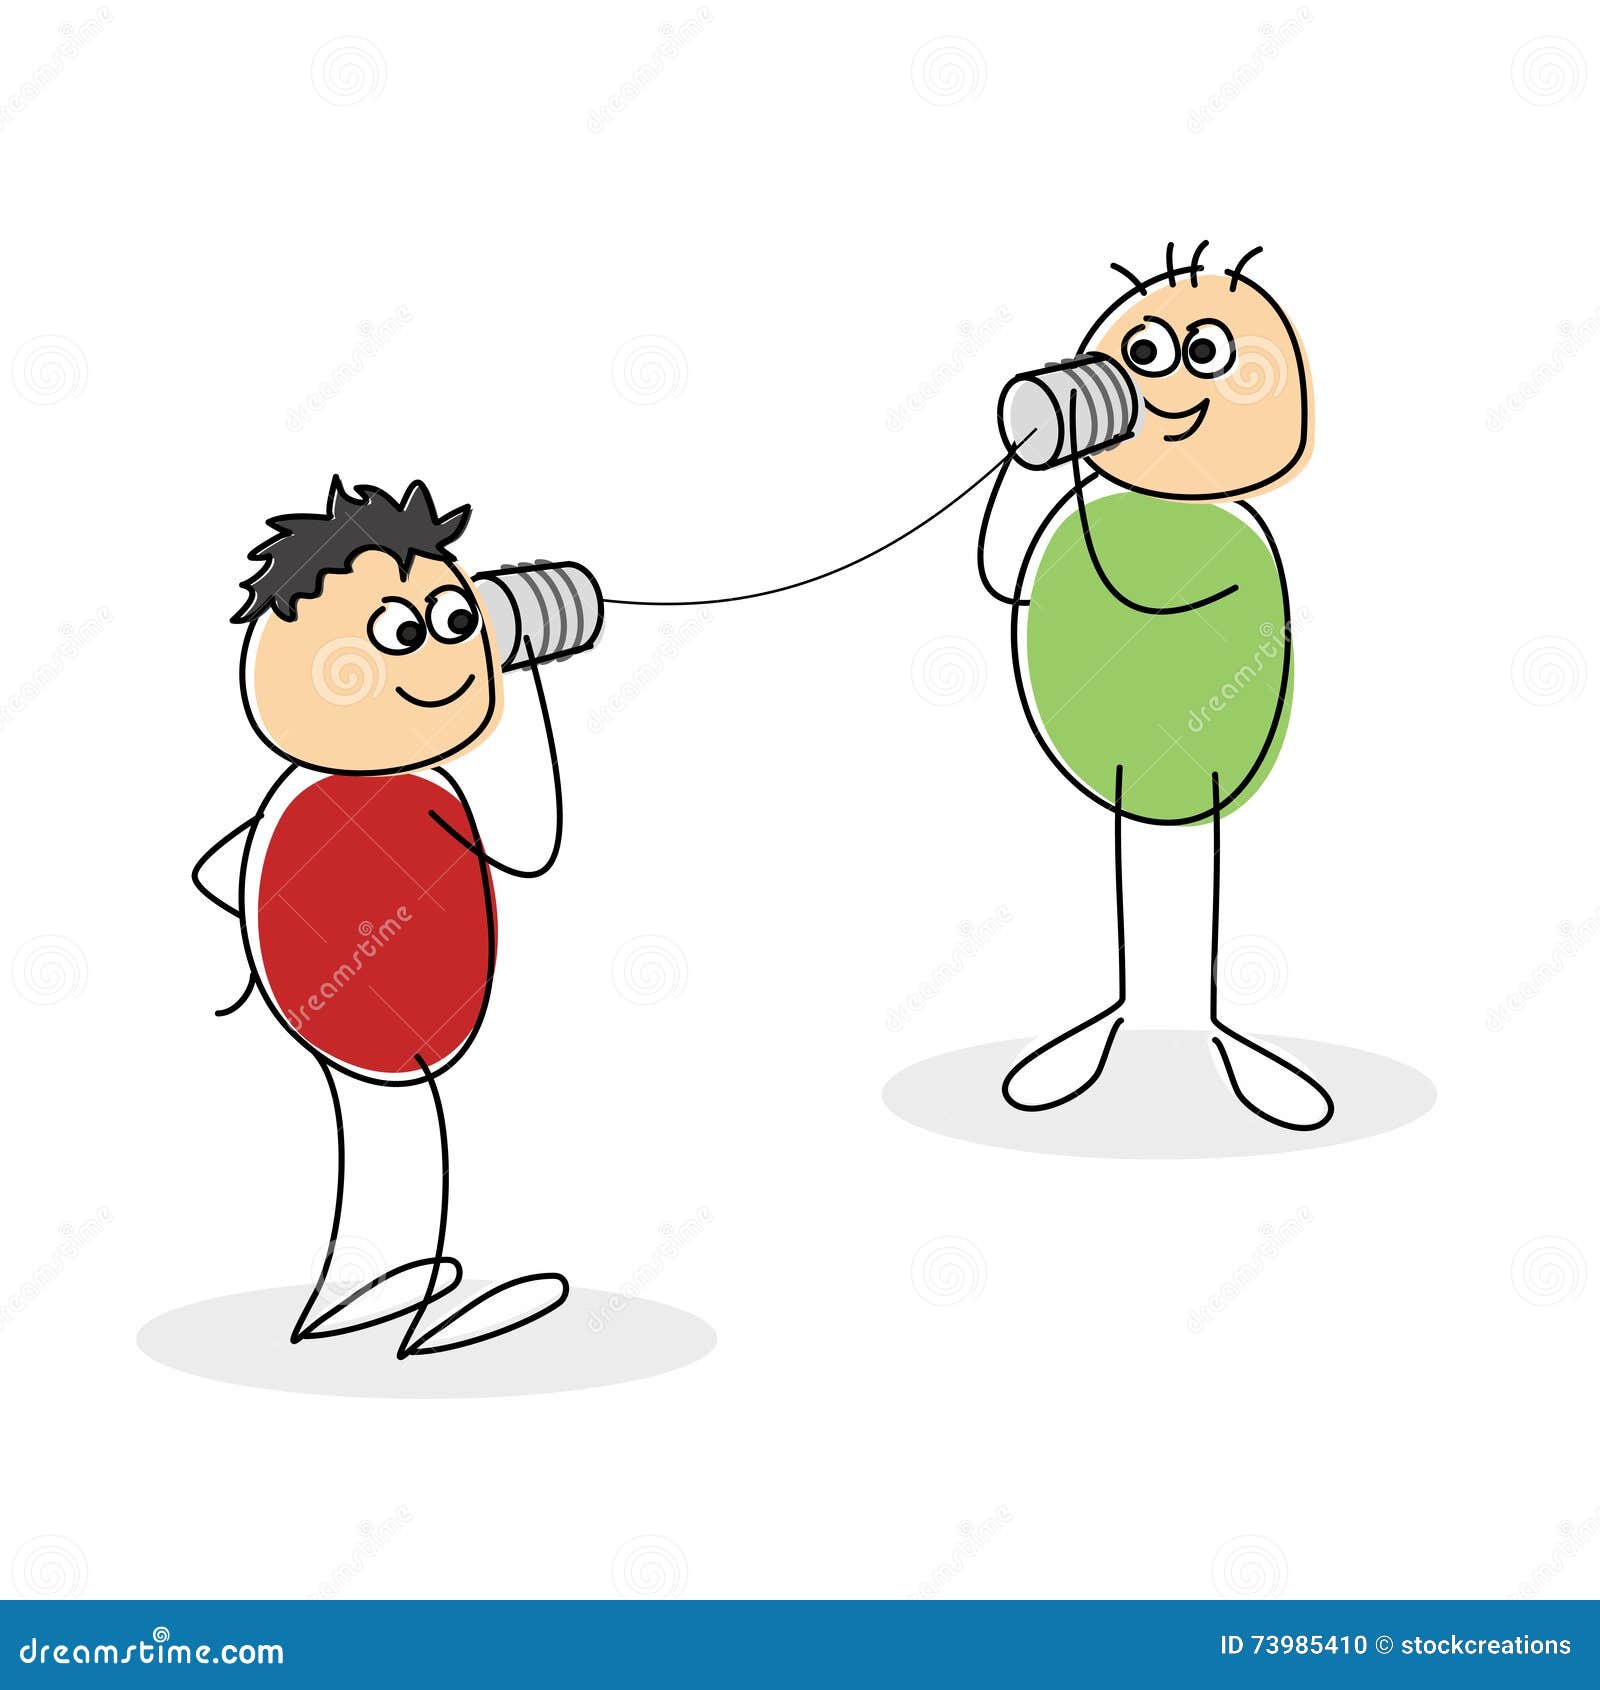 two-smiling-doodle-figures-green-red-tops-hold-can-string-telephone-them-73985410.jpg